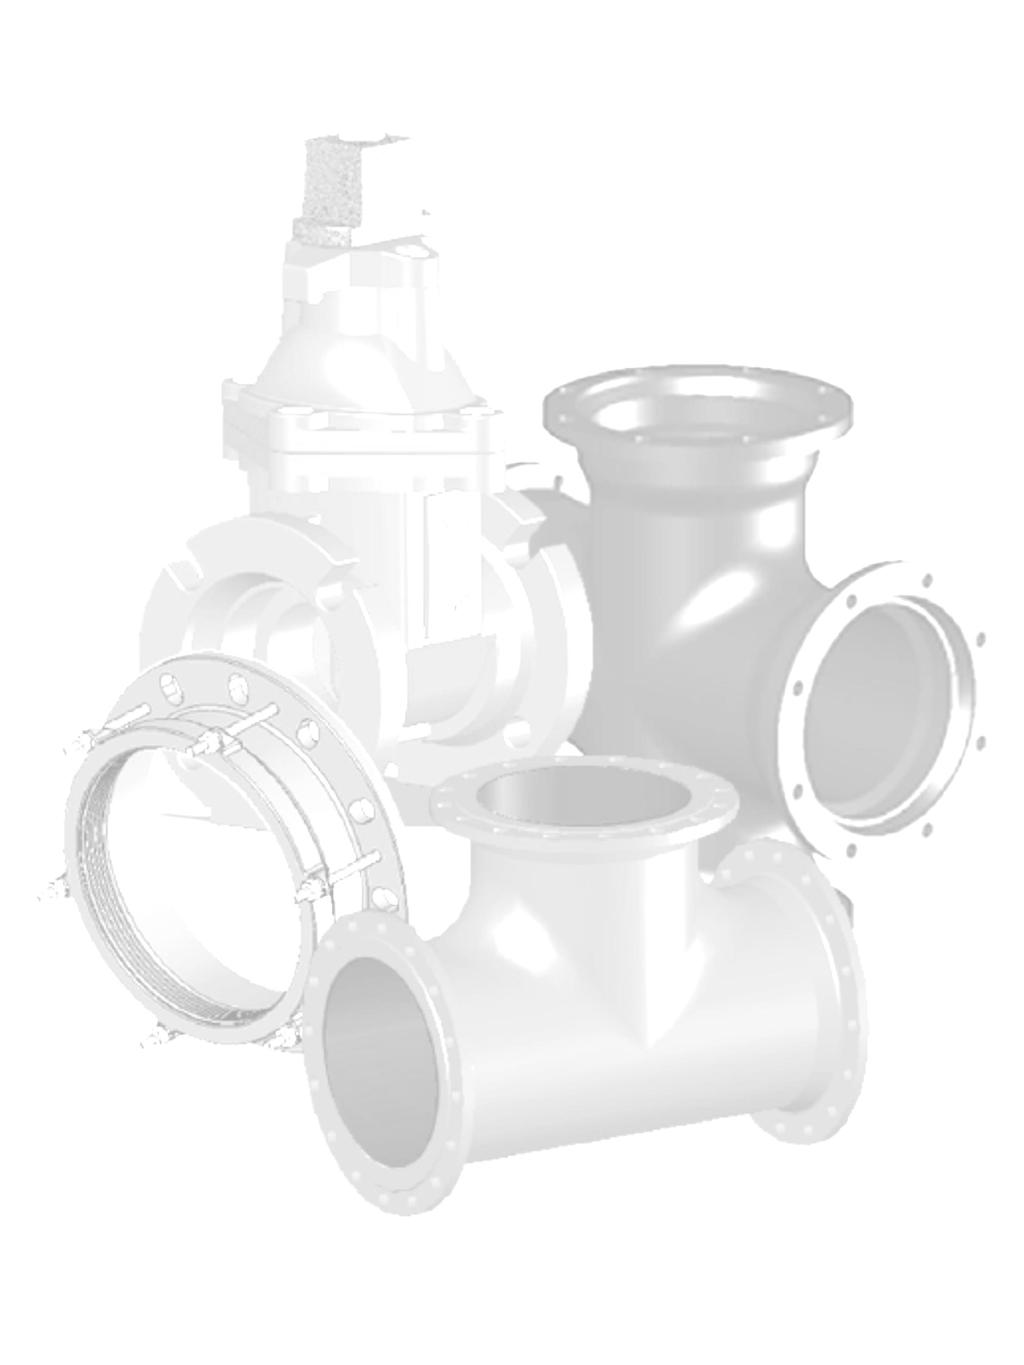 PRICE SHEET (PL-1014-VLV Replaces PL-0513-VLV) TABLE OF CONTENTS VALVES & HYDRANTS Page(s) Product Line Price Sheet 1 AWWA C515 Gate Valves NRS Series 2010 & 1010 PL-1014 Multiplier 2 AWWA C515 Gate